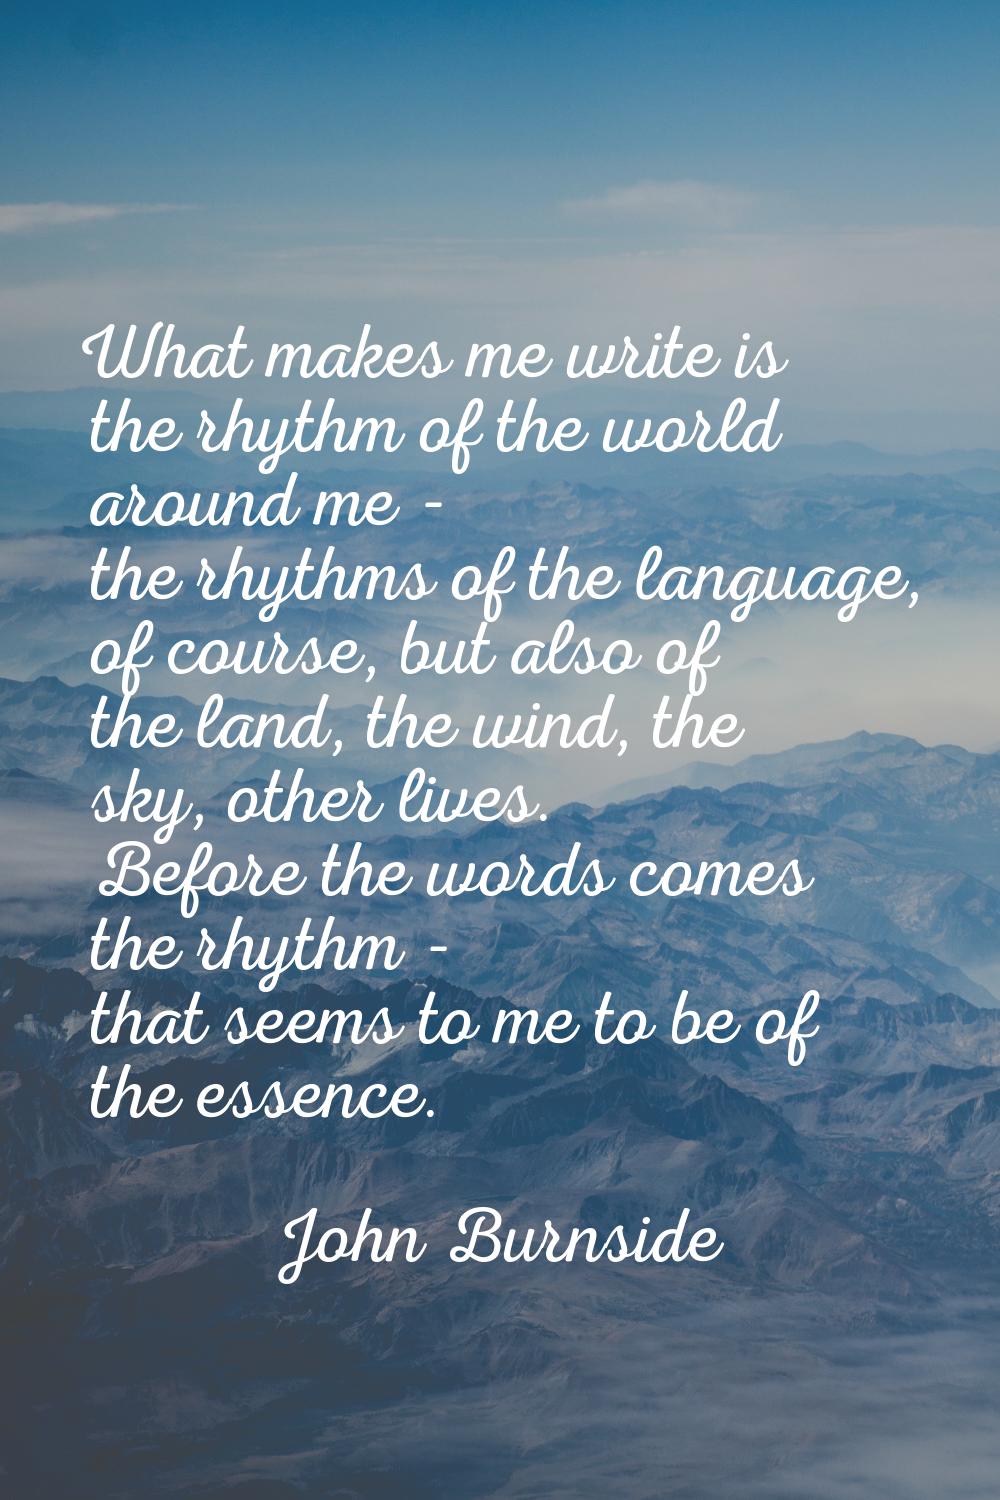 What makes me write is the rhythm of the world around me - the rhythms of the language, of course, 